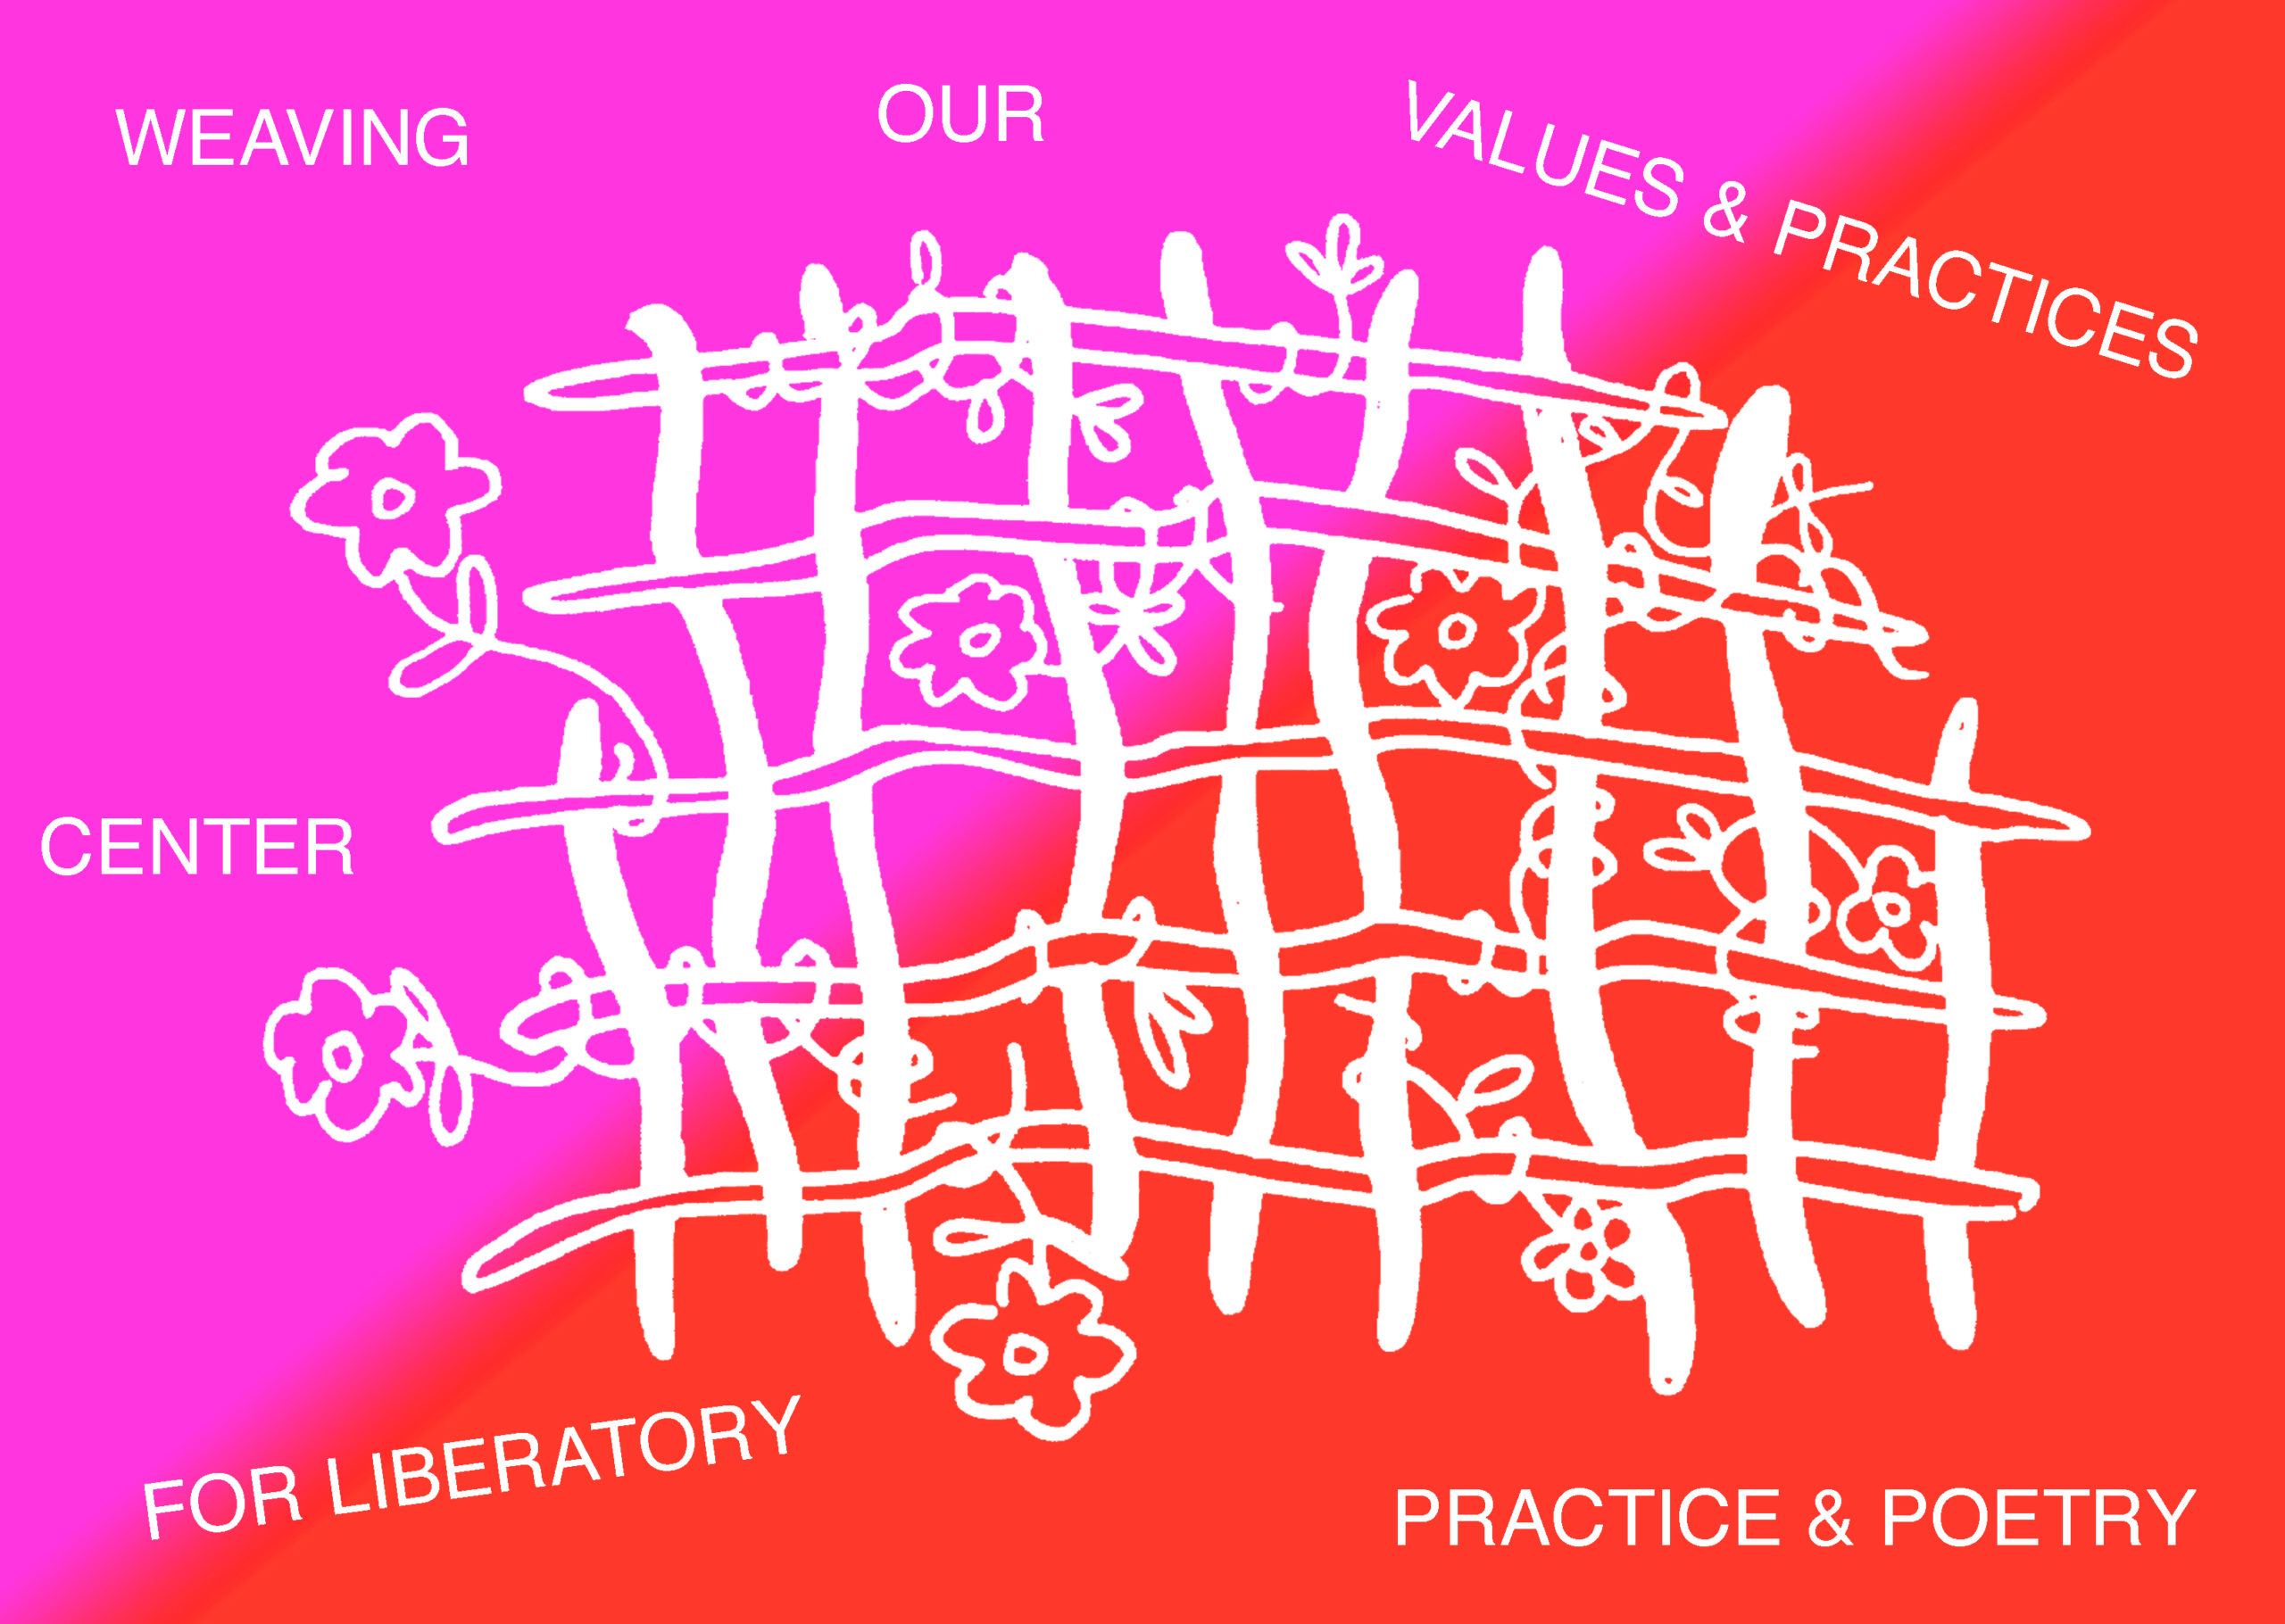 A white line drawing of a weaving appears on a gradient bright purple to red background. The weaving has flowers that grow within the cracks of the warp and weft. Surrounding the weaving illustration, in all capital white letters, it says, “Weaving our Values & Practices” on top, and “Center for Liberatory Practice & Poetry” beside and below the weaving.